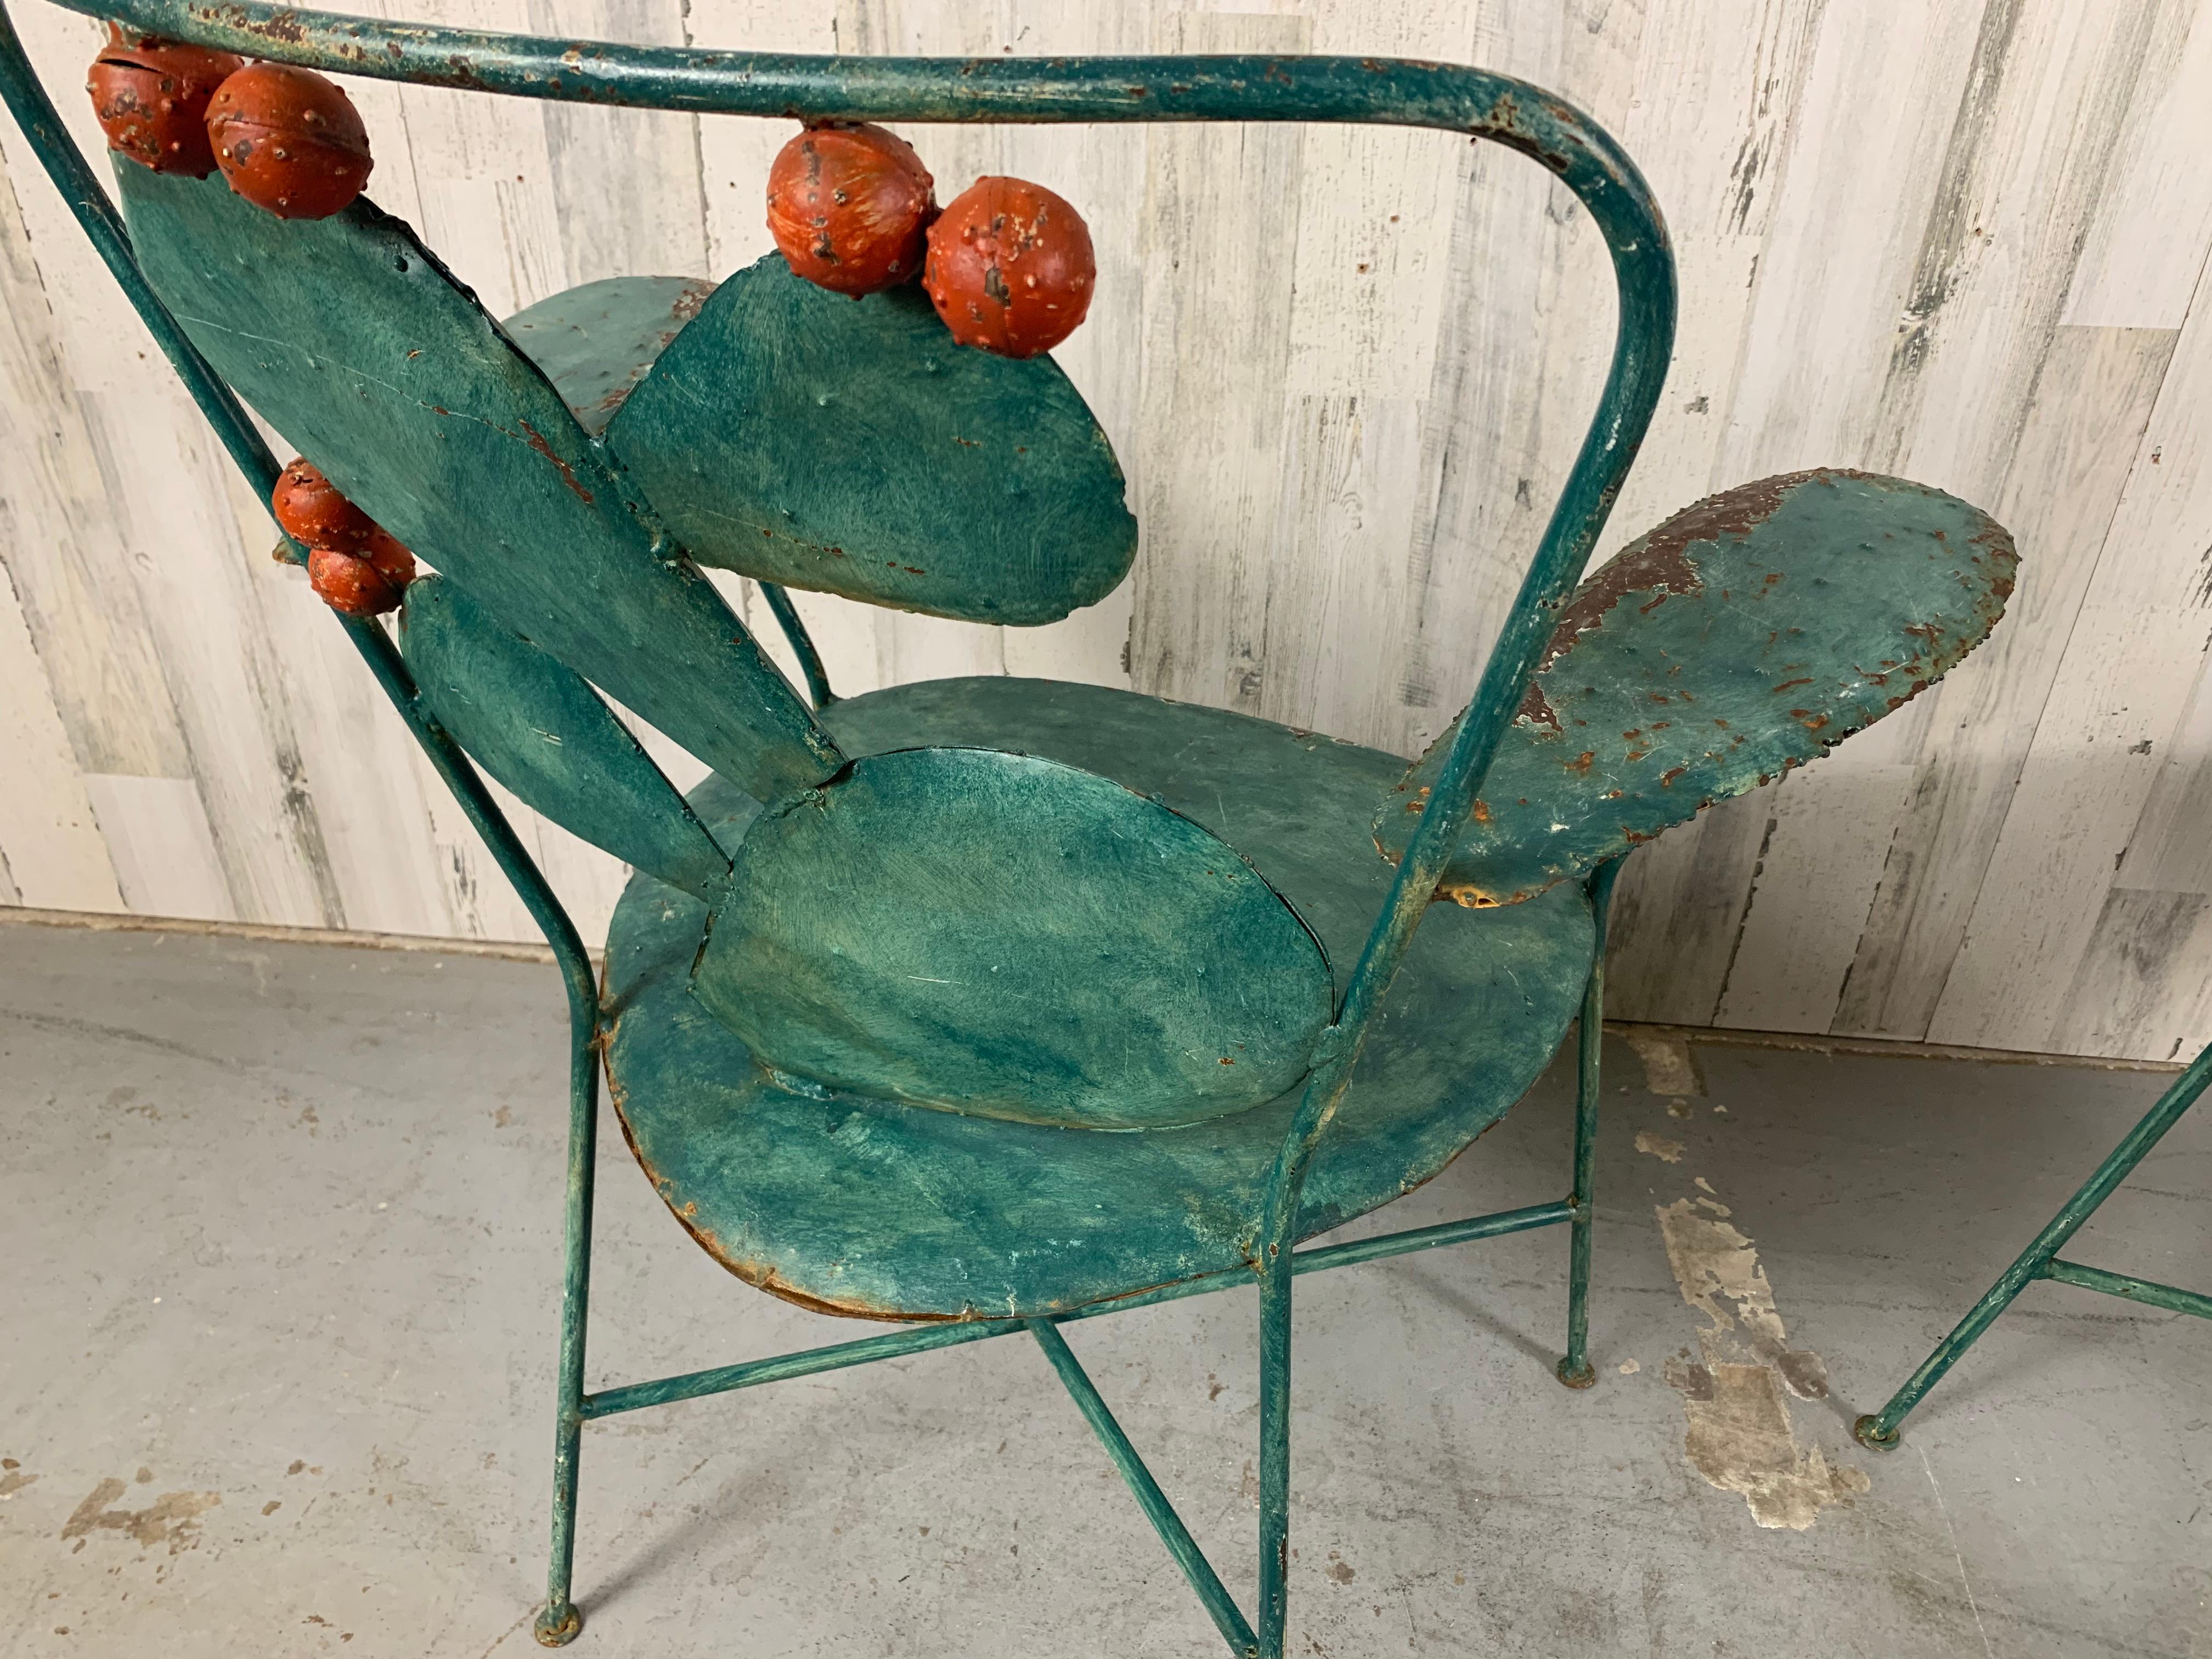 Prickly Pear Garden Chairs 3